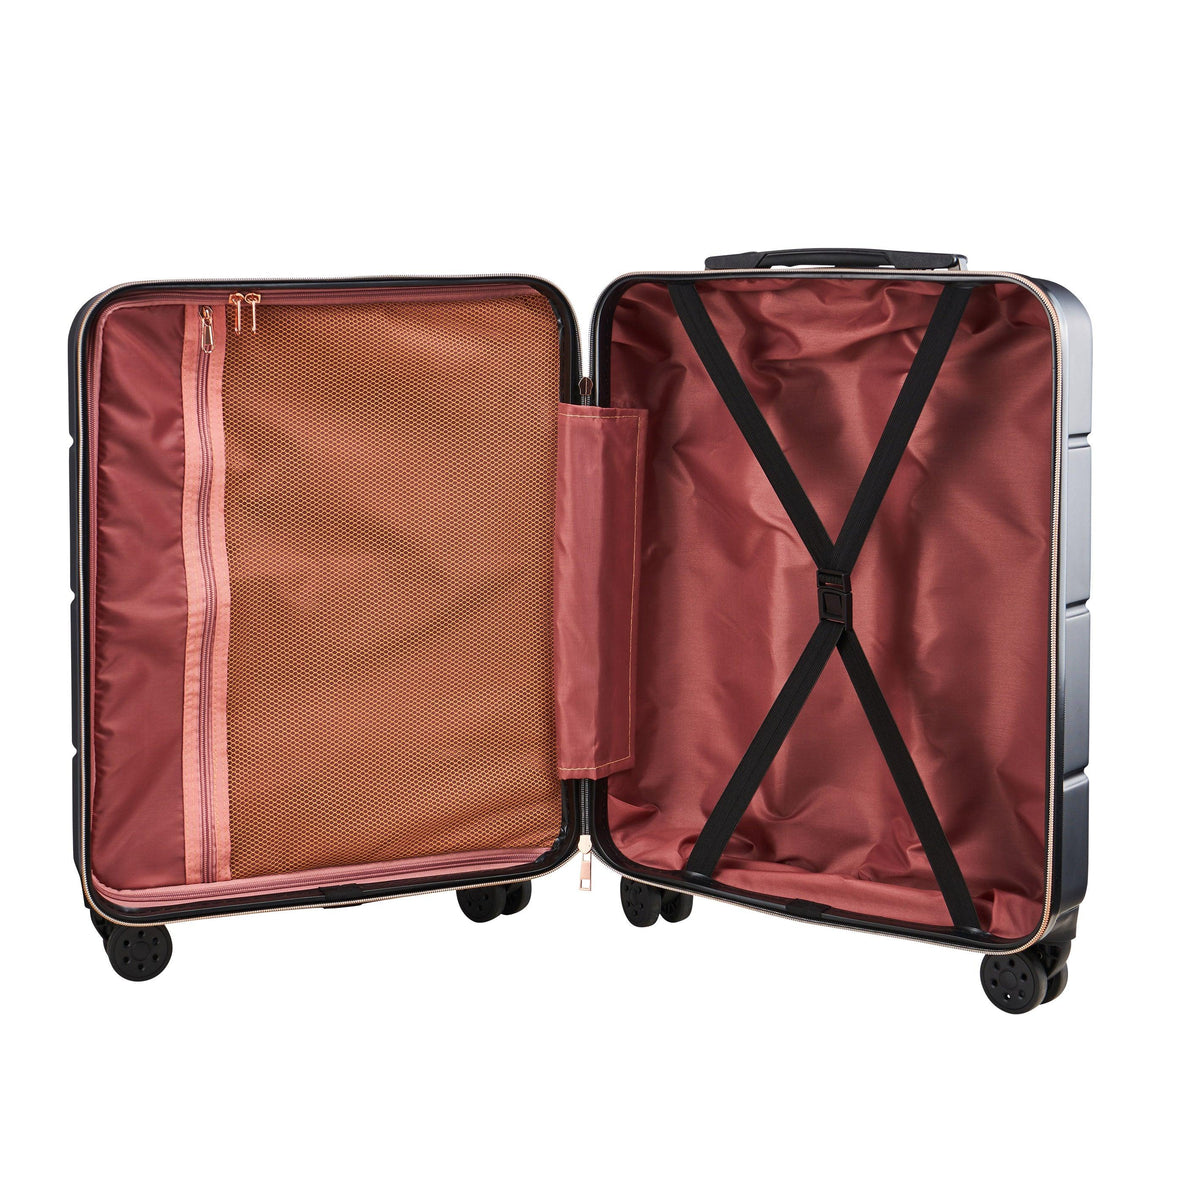 Anode 40L Black & Rose Gold Cabin Luggage Suitcase 55x40x20 cm – Cabin Max